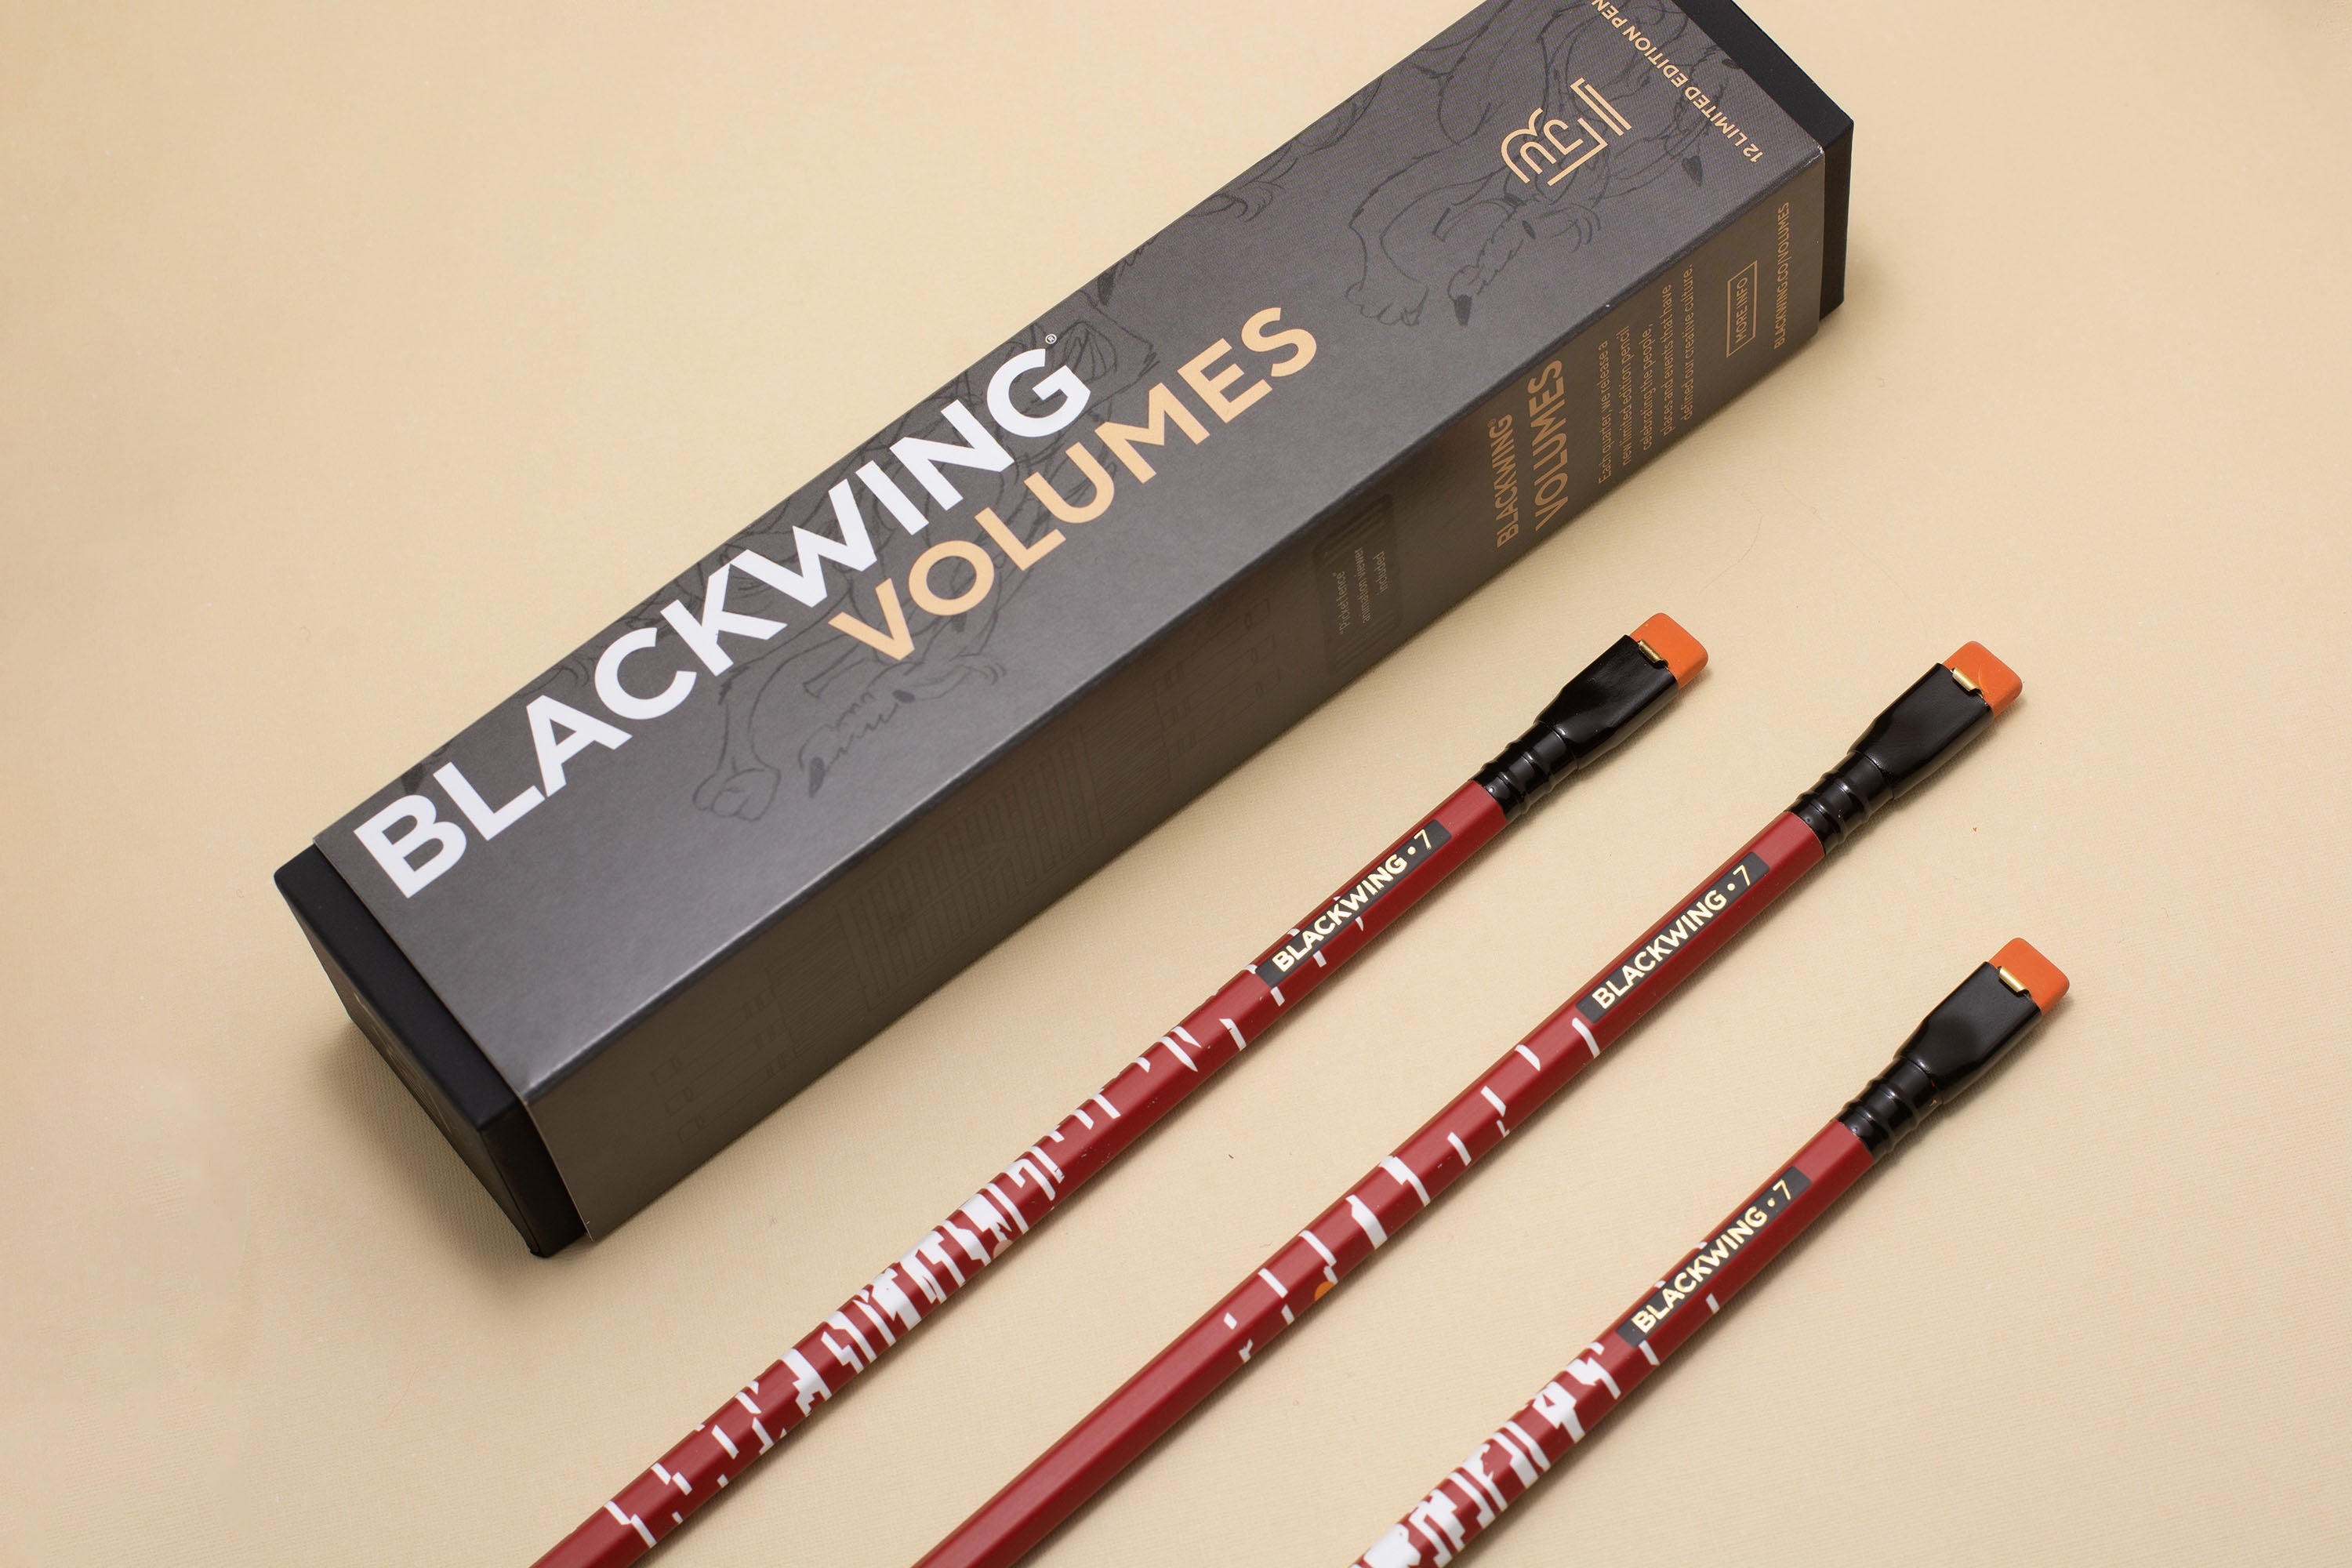 Two Blackwing Volume 7 (Set of 12) pencils next to a box.